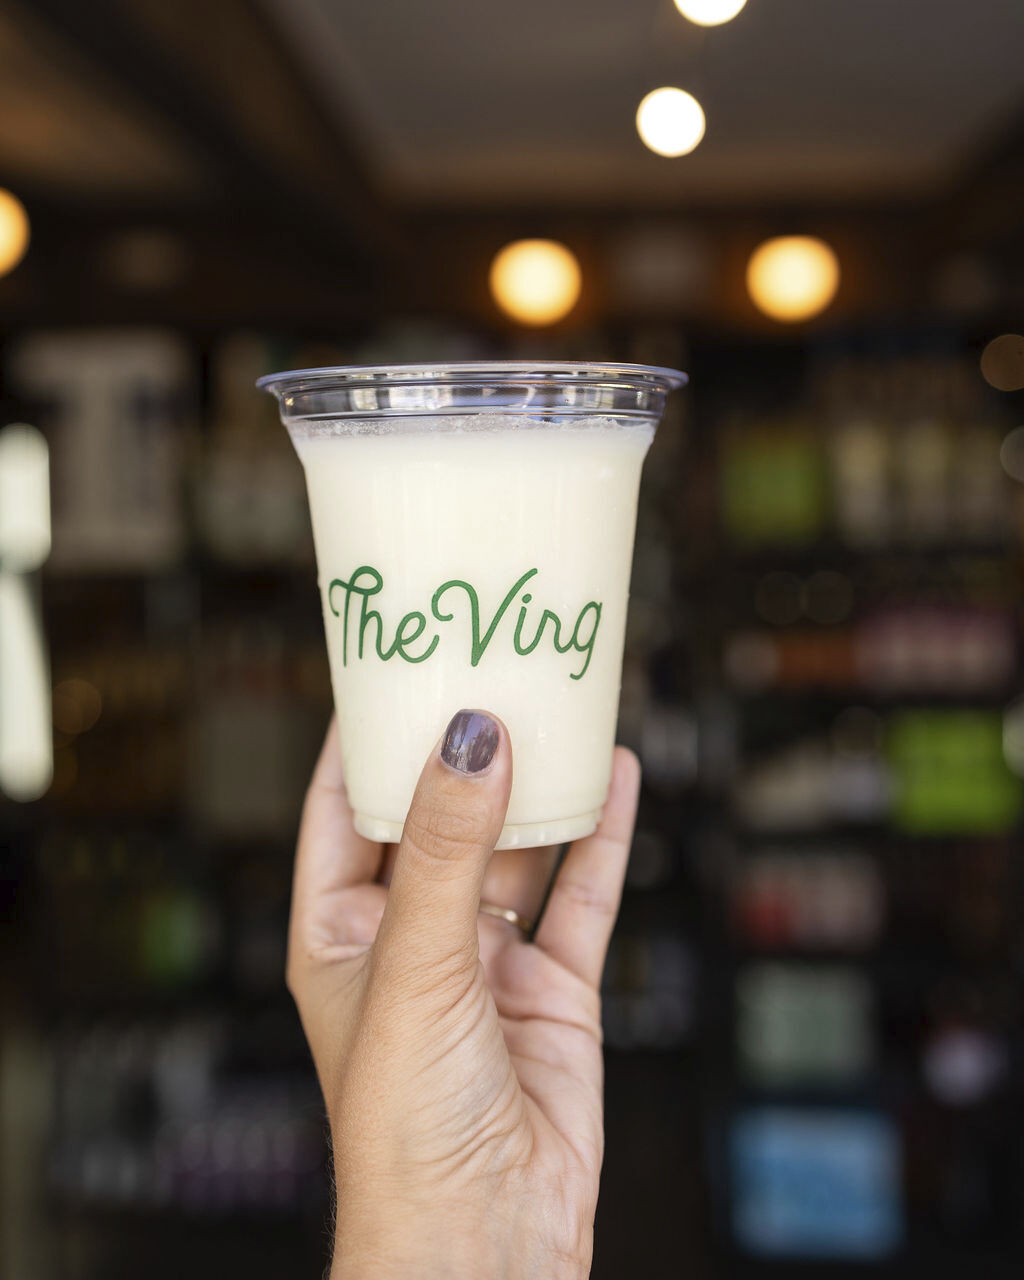 A photo captures a hand holding a juice glass featuring "The Virg" logo.